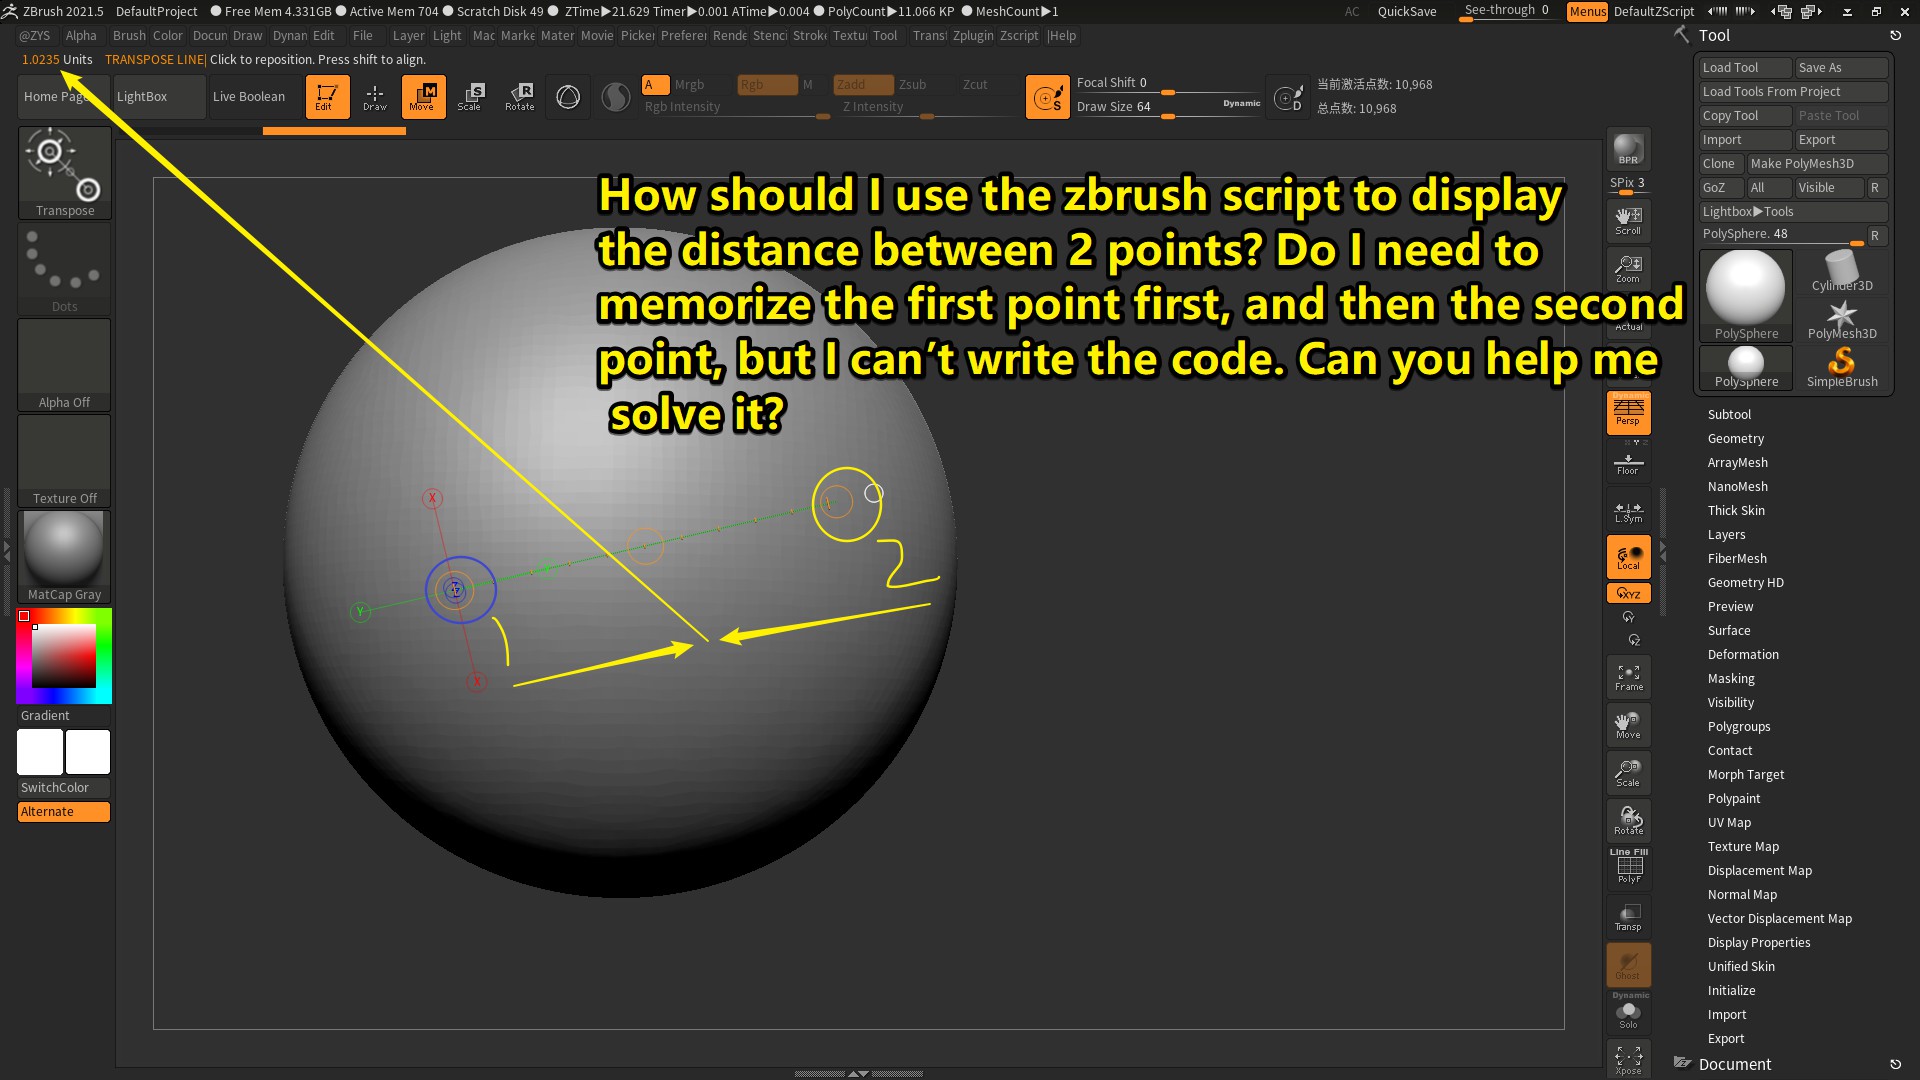 zbrush 1 vertice points out